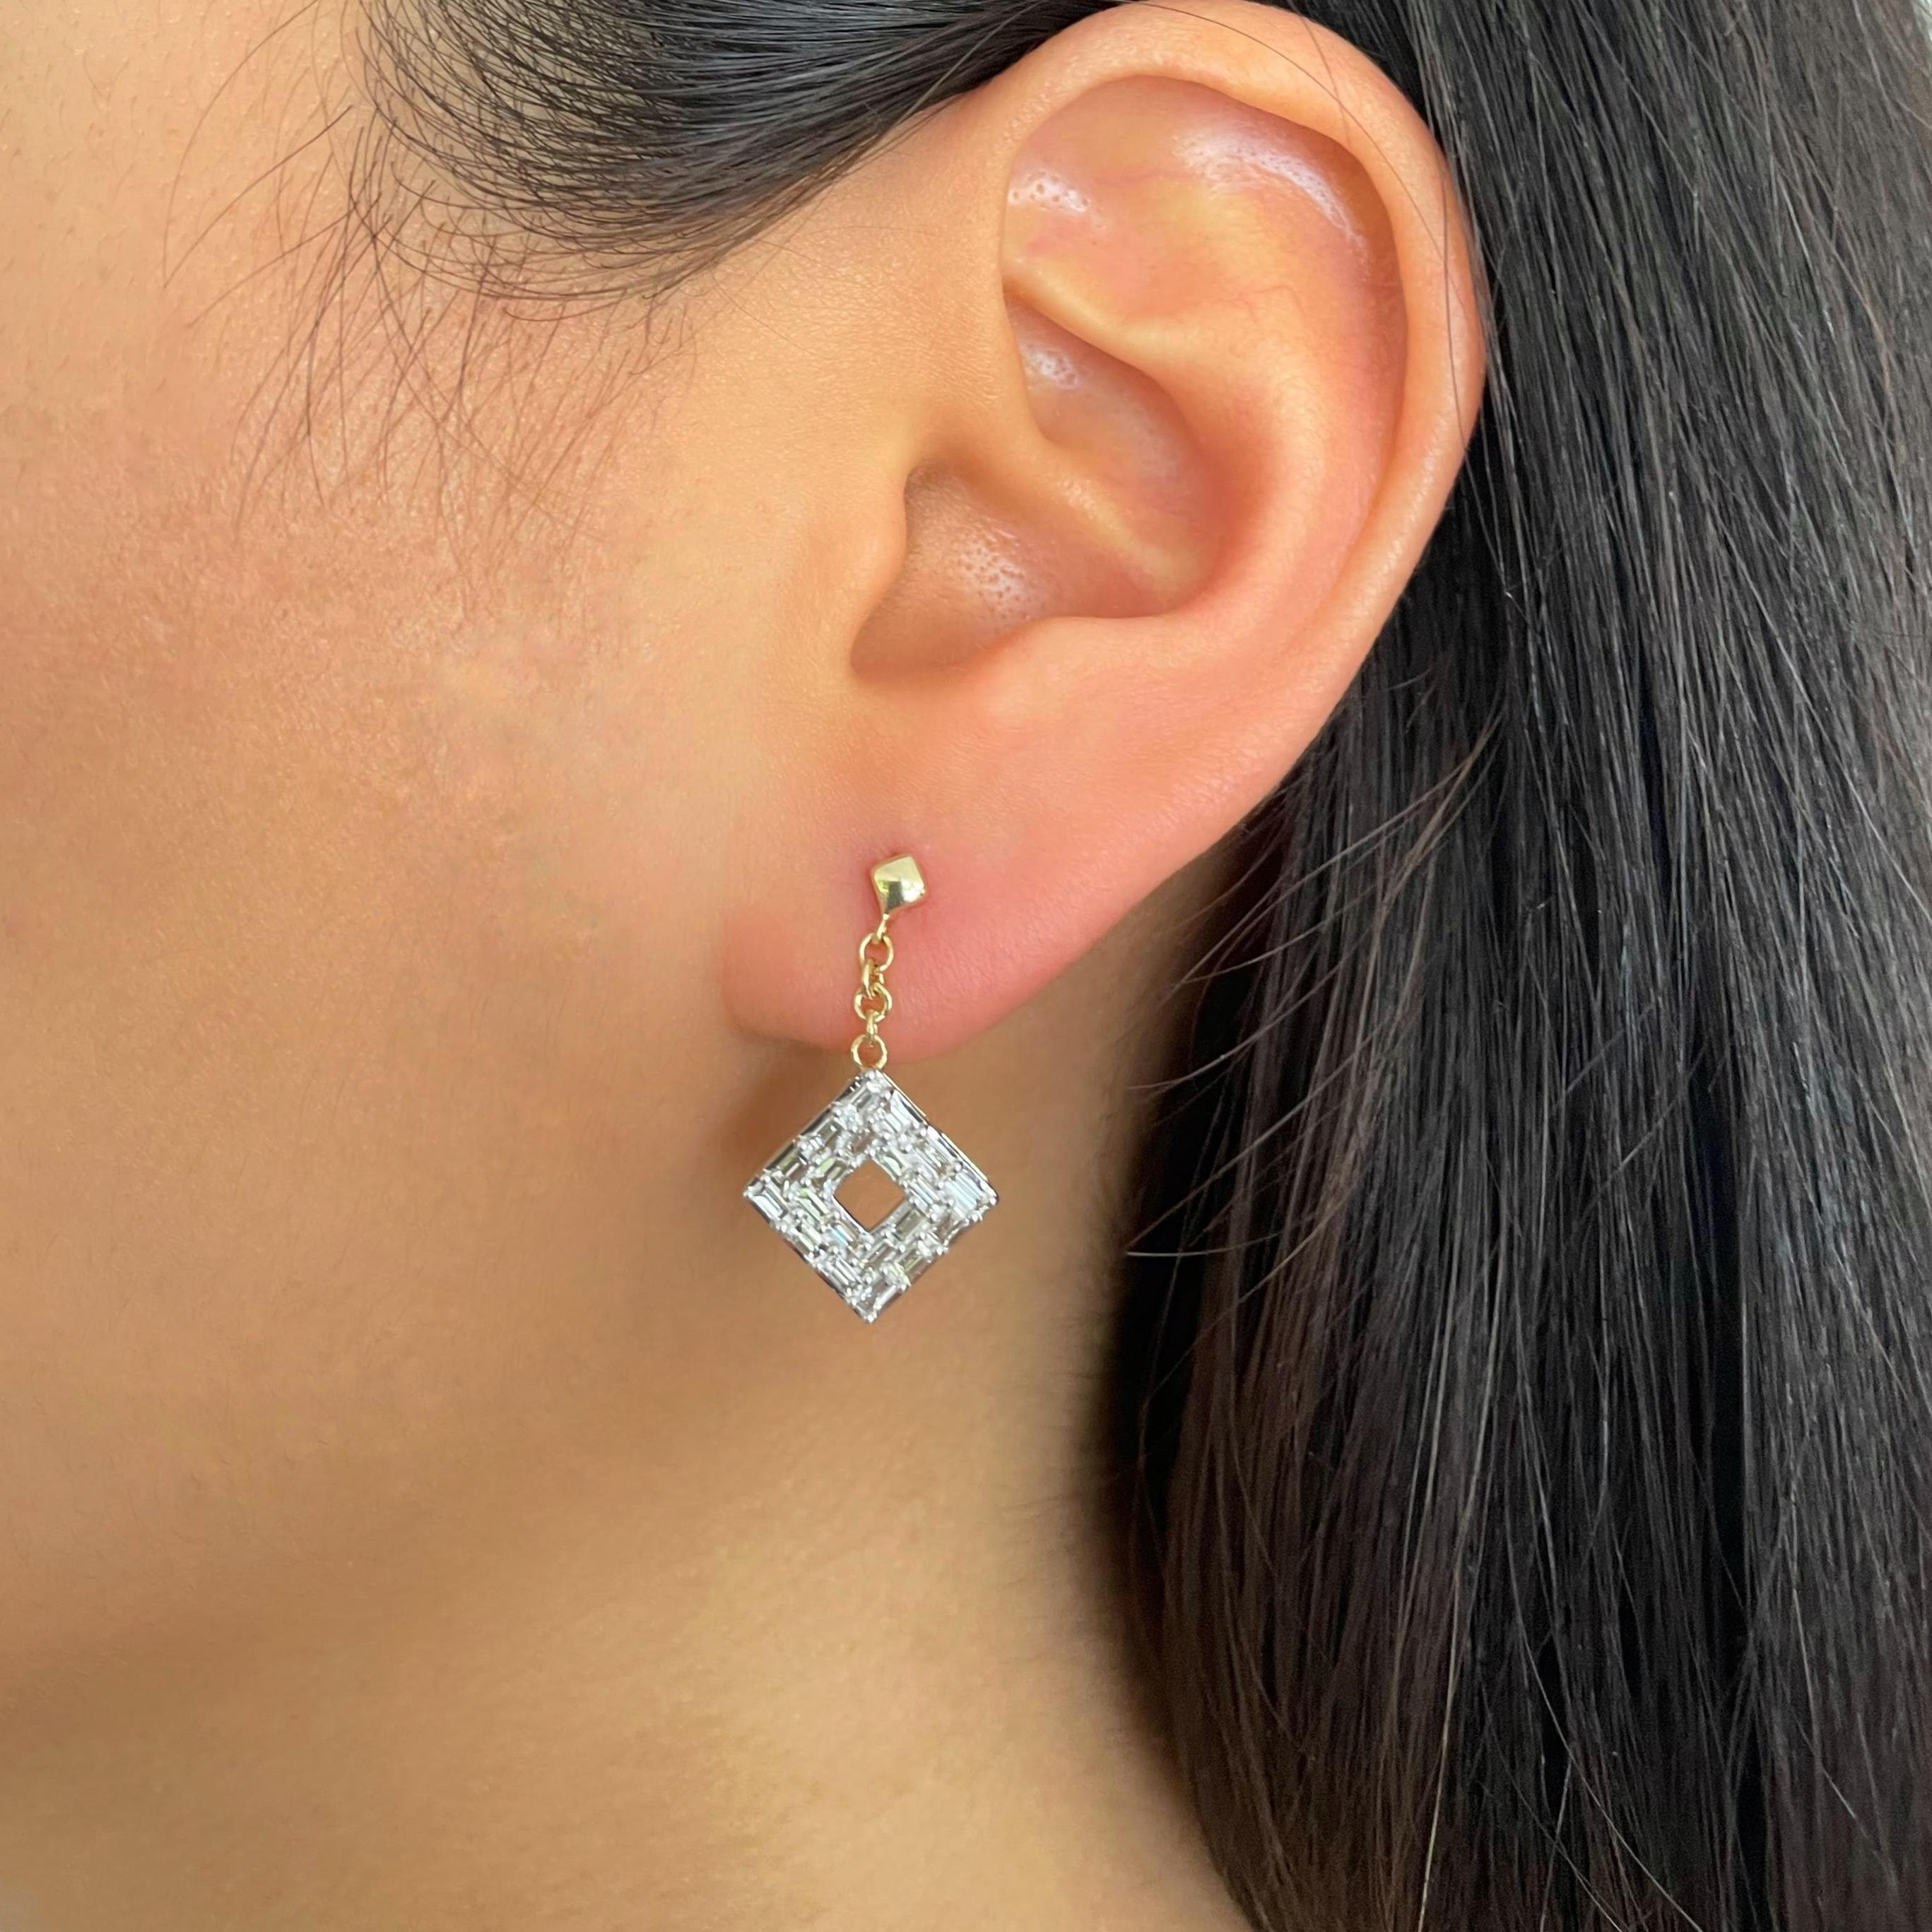 The 14K yellow gold dangling earrings feature solely baguette diamonds that give it a profound look but the delicate dangle is subtle enough for an everyday wear. Because of its universal style, these earrings are perfect for any occasion including